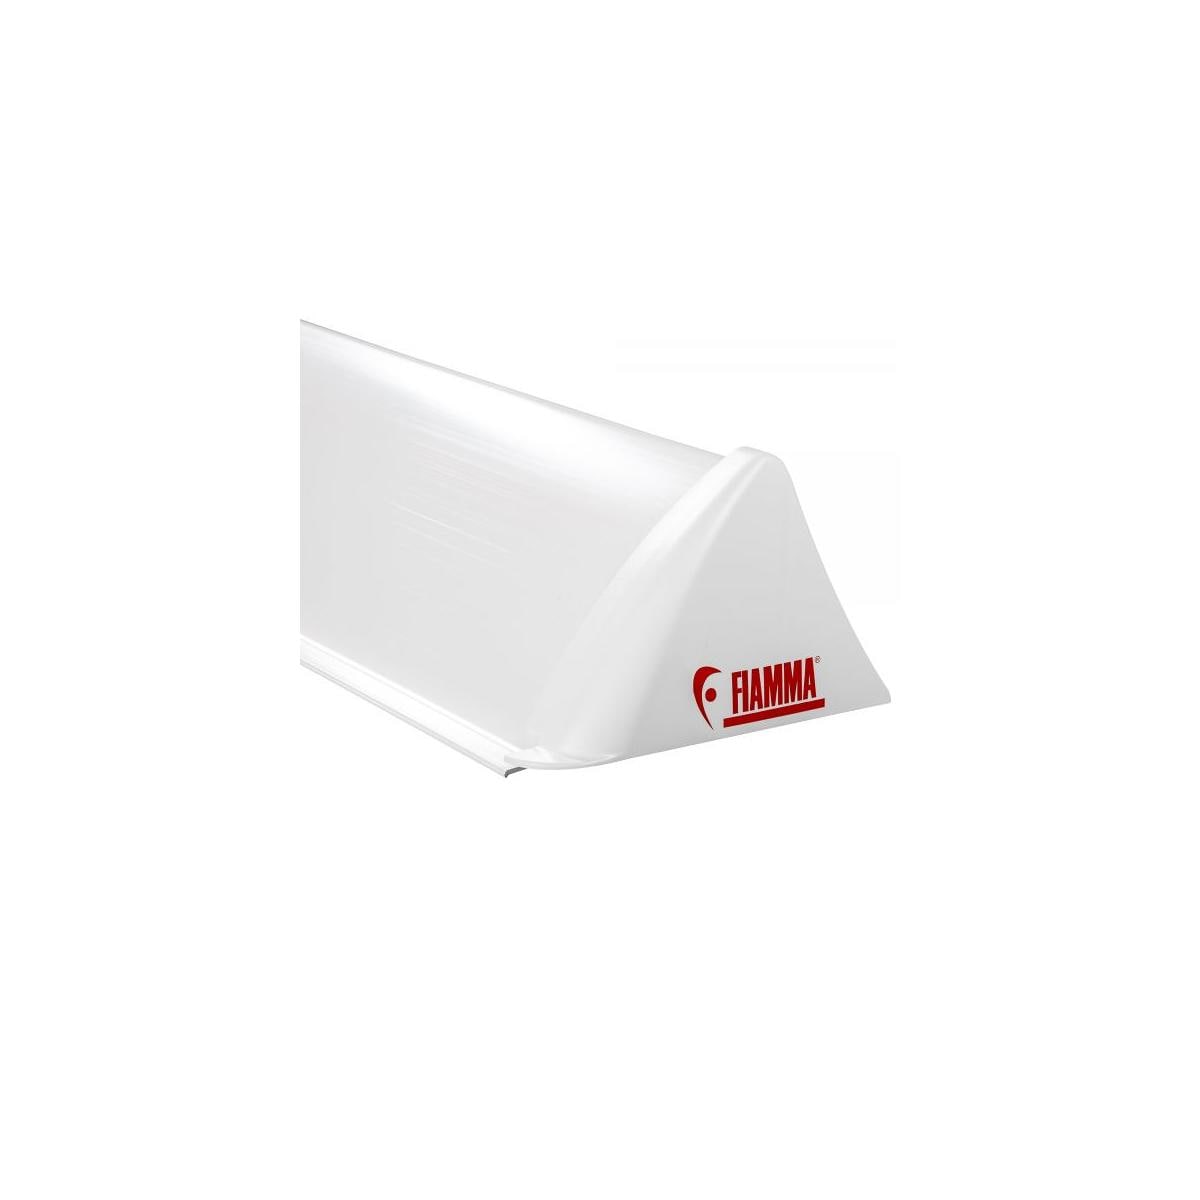 Fiamma Spoiler Universal, 110x20x12cm bei Camping Wagner Campingzubehör